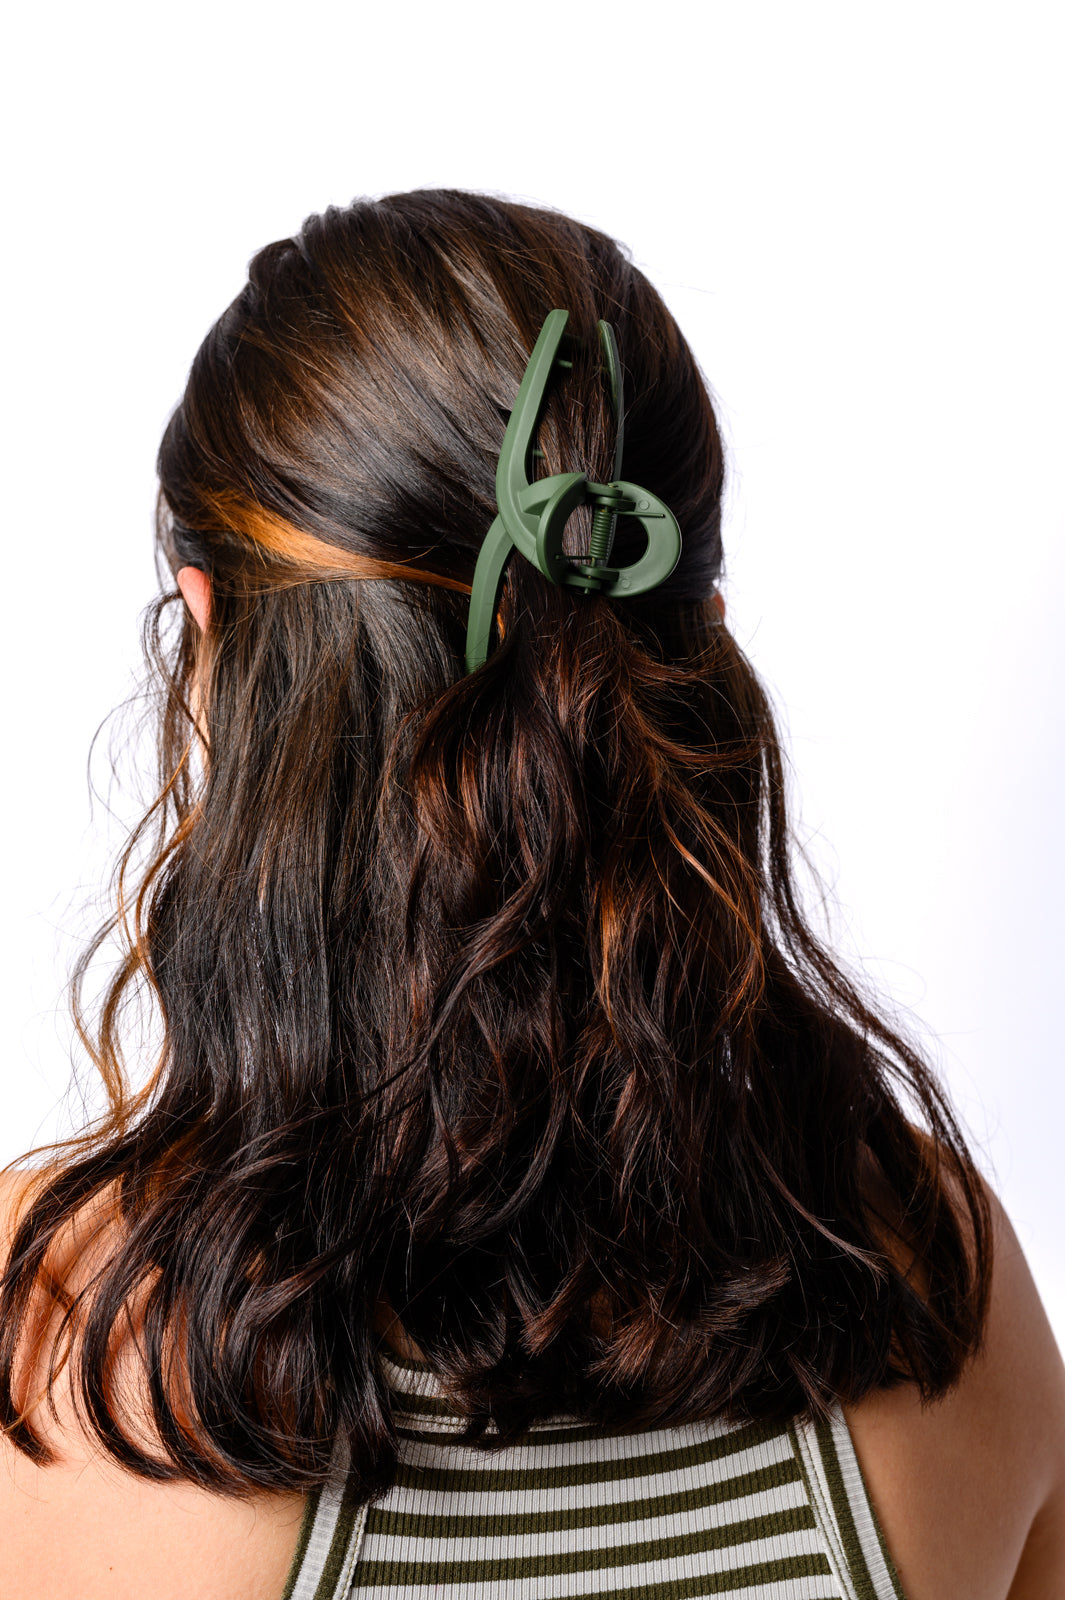 Claw Clip Set of 4 in Forest Green (Online Exclusive)